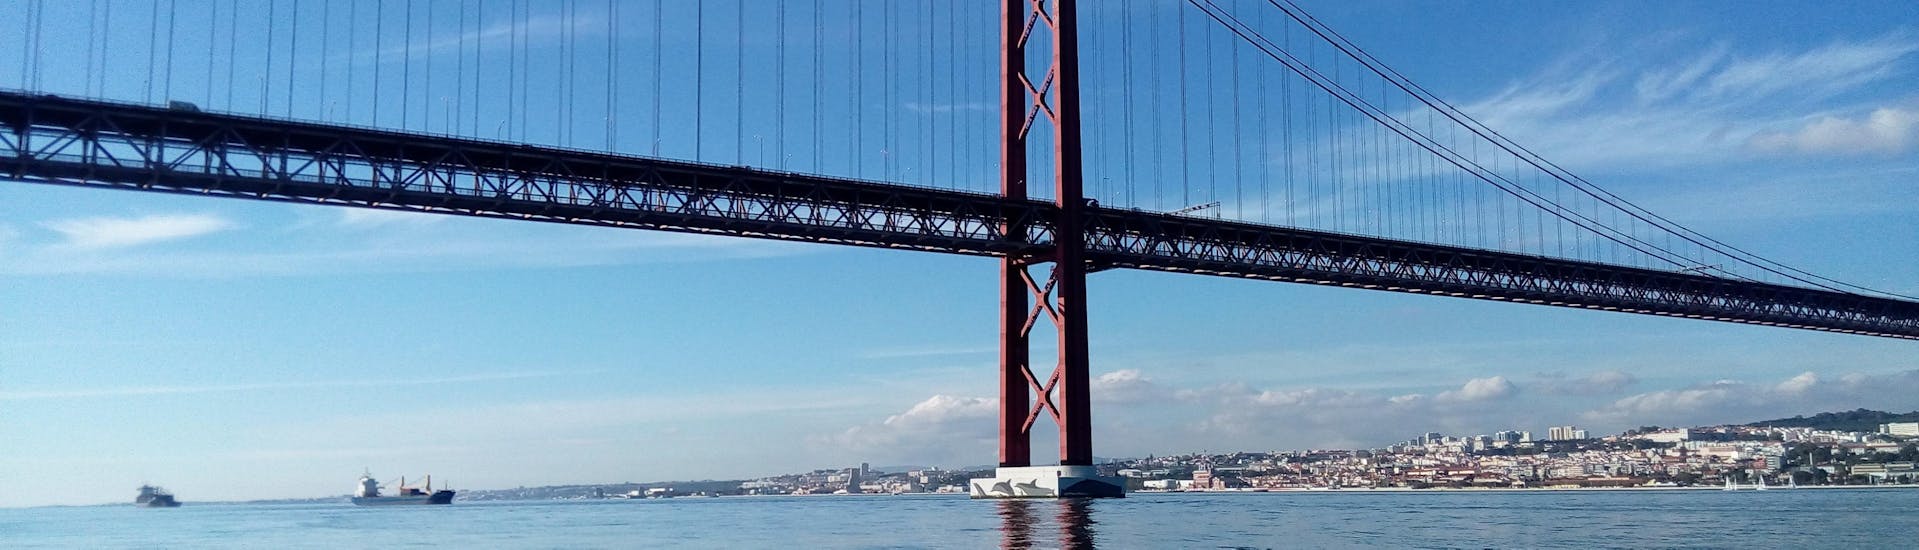 The majestic Ponte Vasco da Gama can be admired during this Sailing Boat Trip on the Tagus incl. Ponte Vasco da Gama with Lisbon by Boat.